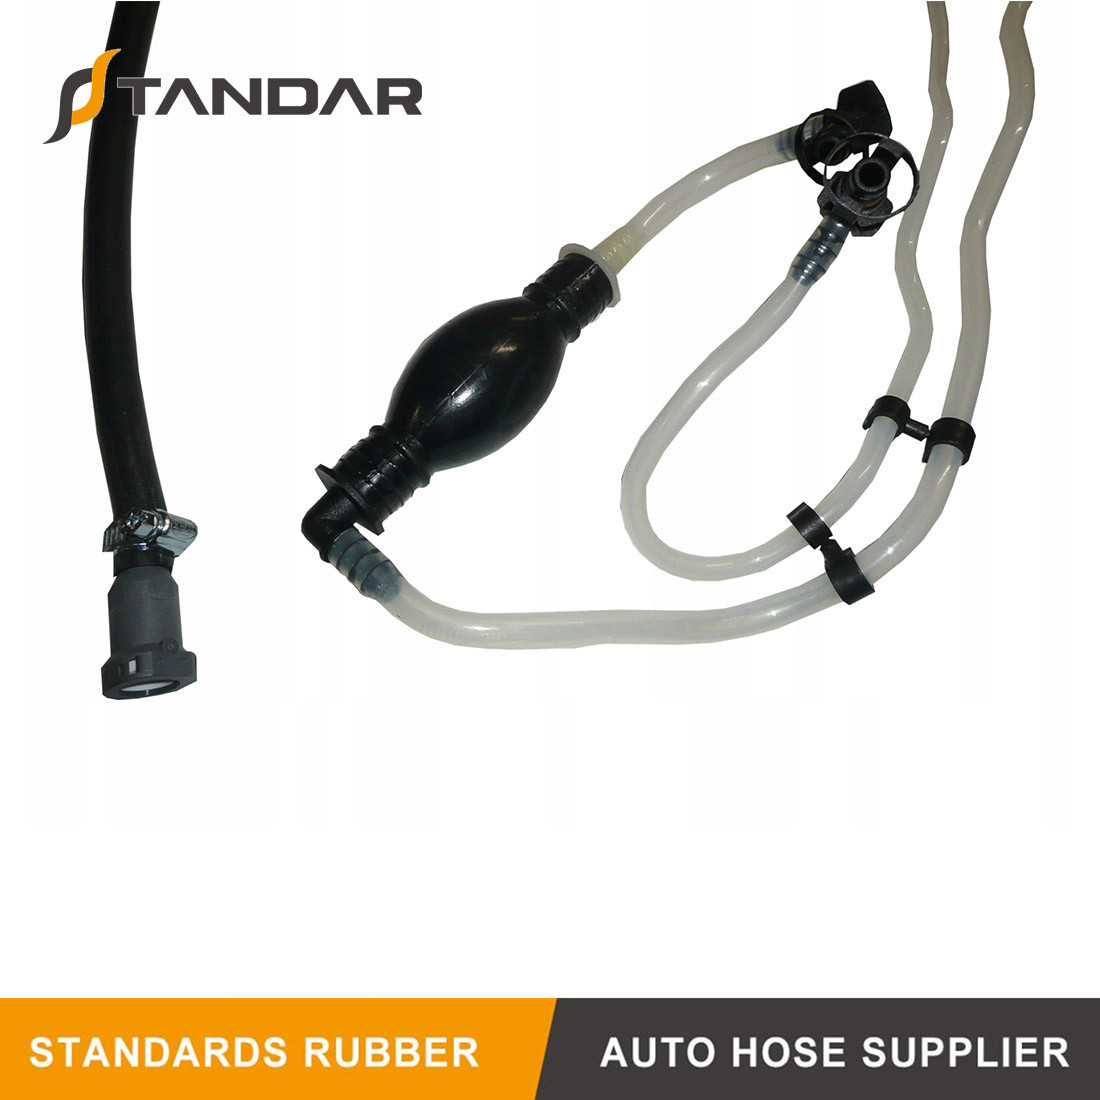 8200050395 rubber braided submersible outboard flexible automative diesel Fuel Line With Hand Pump For Renault Kangoo